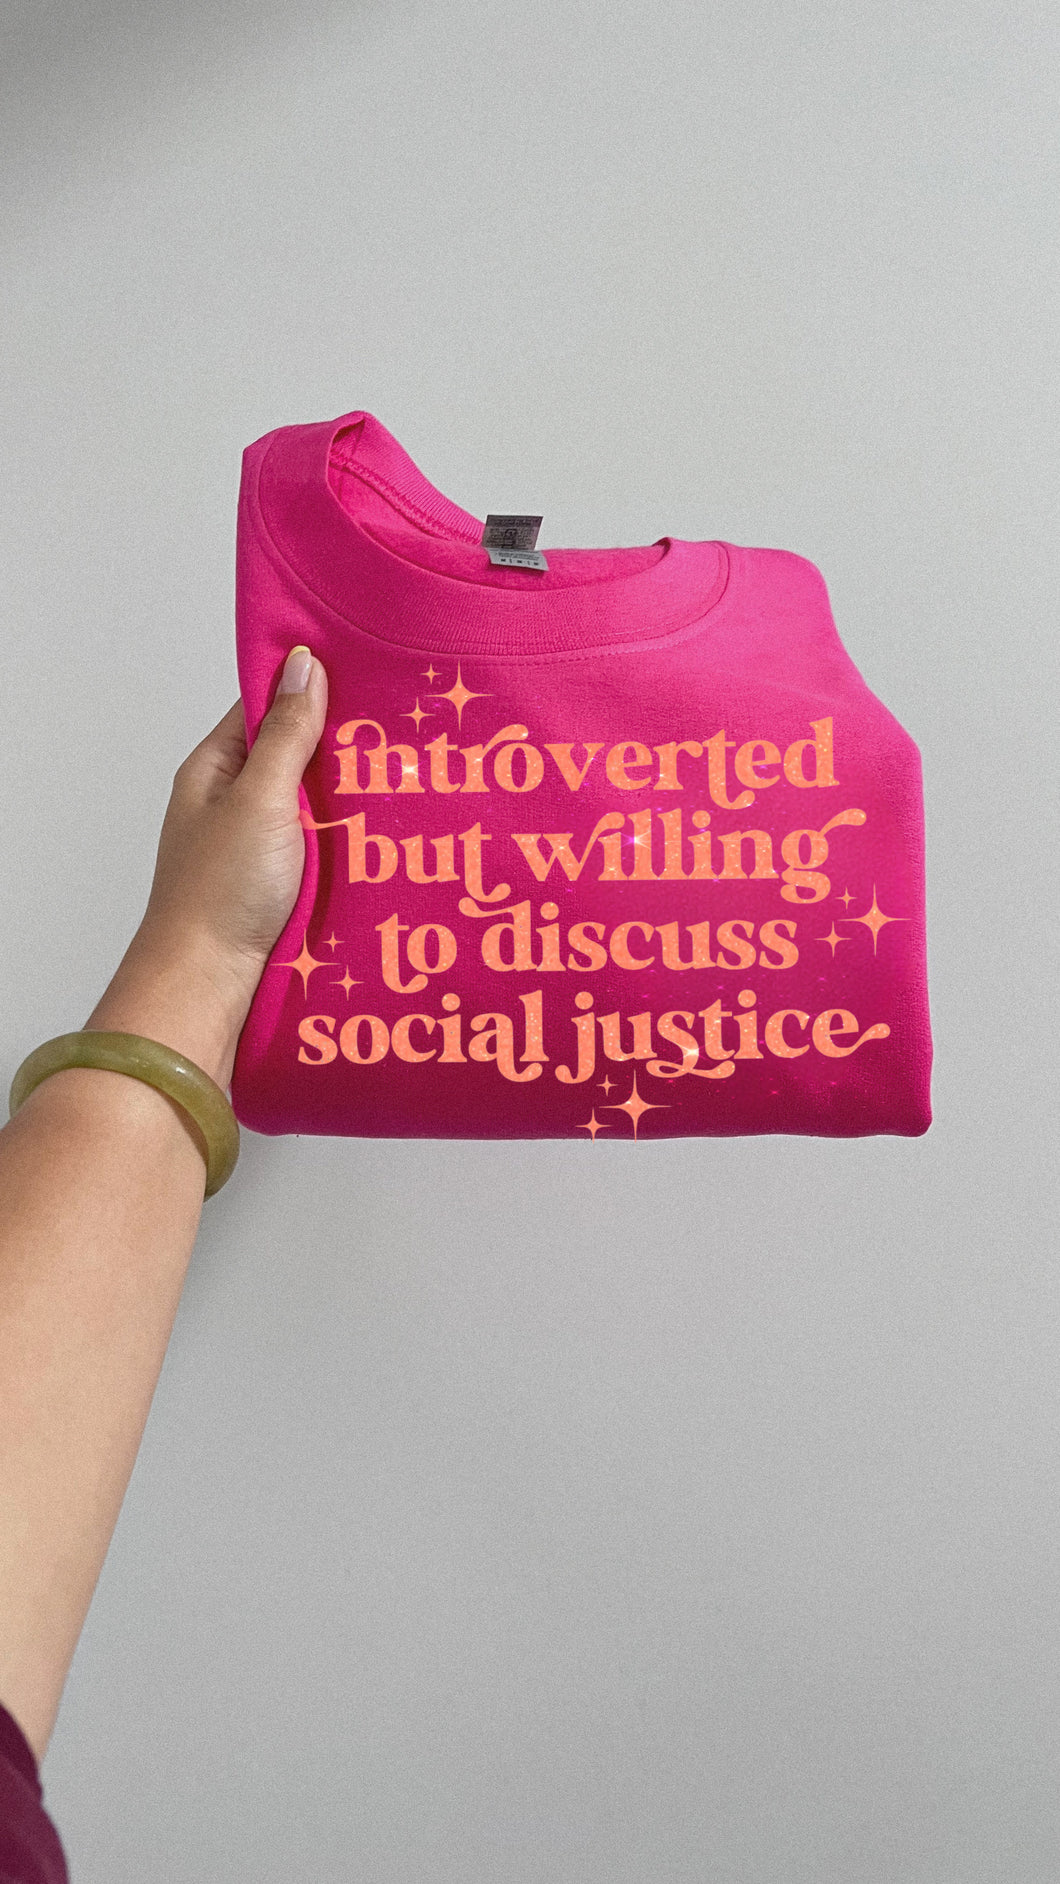 Introverted but willing to discuss social Justice